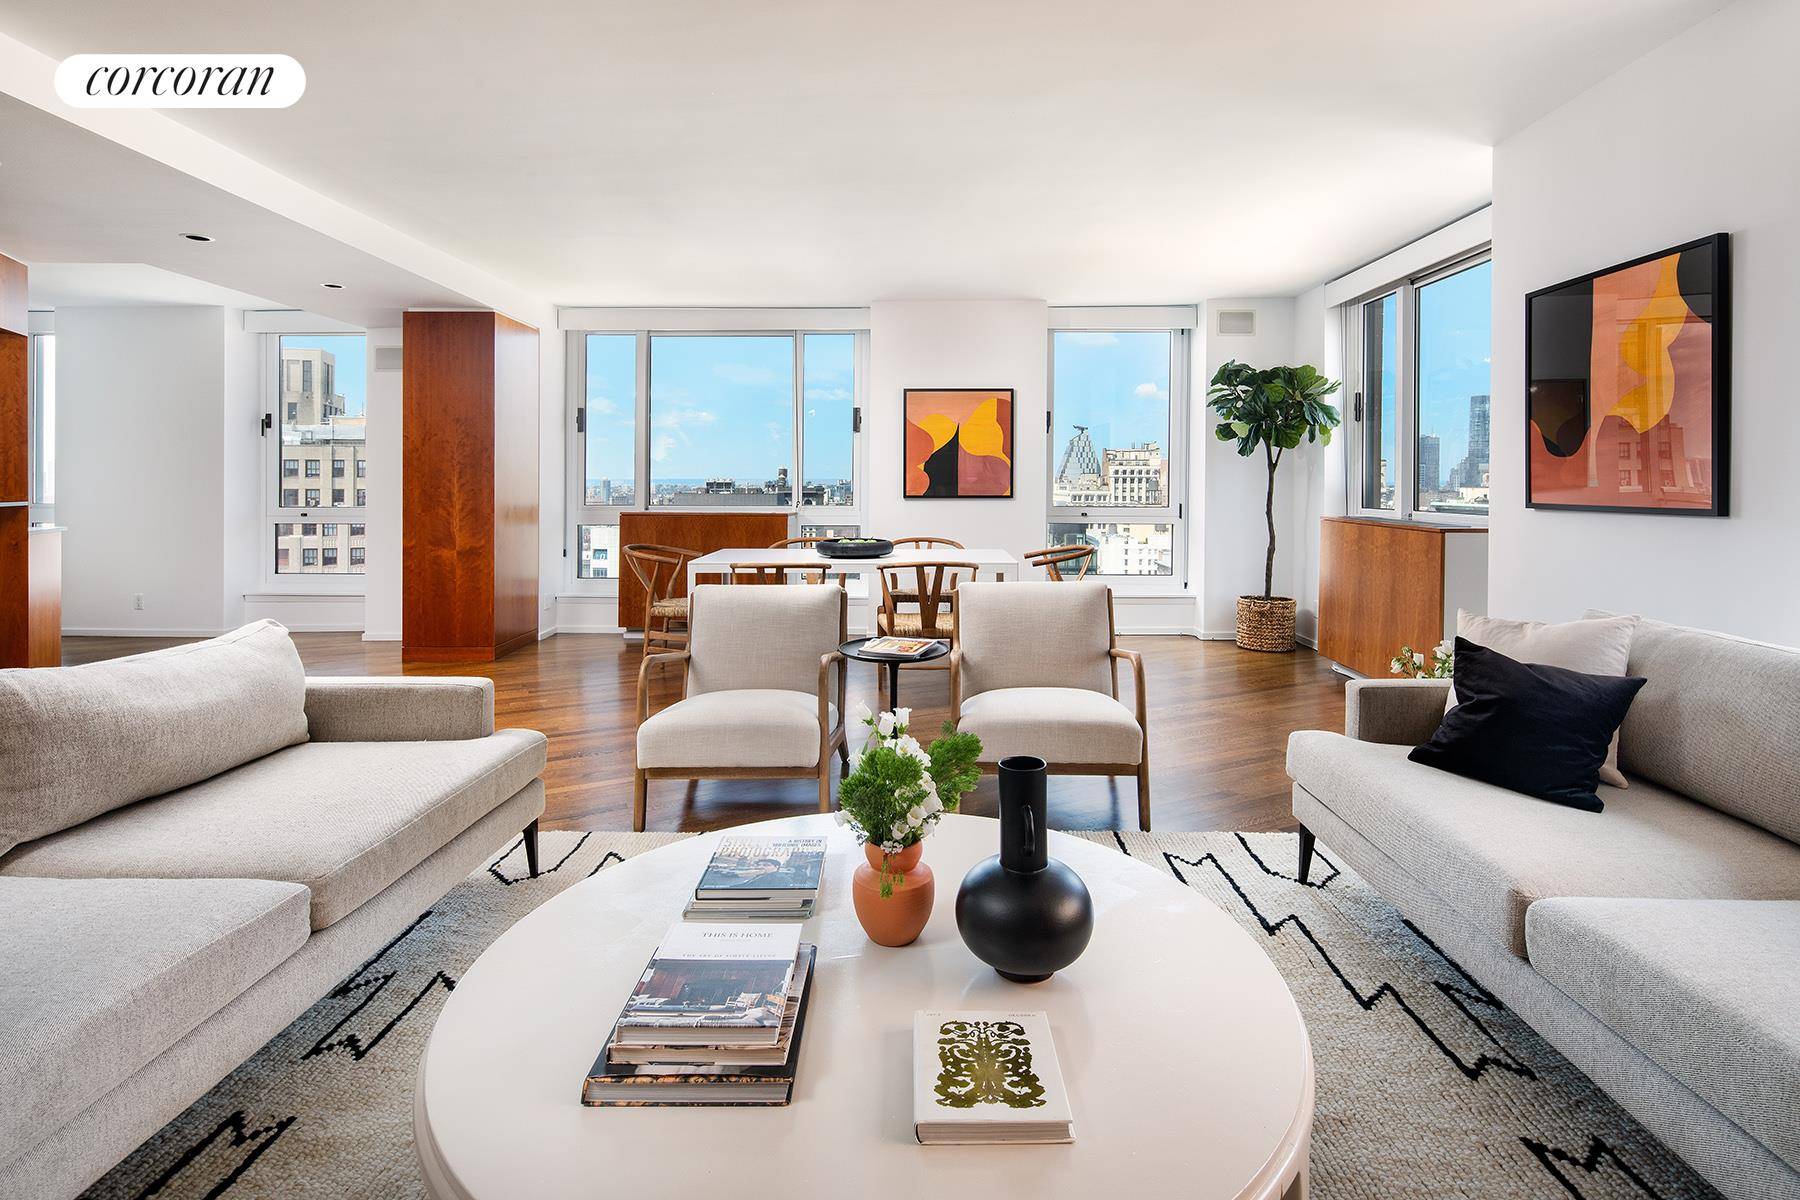 Perched high above Union Square Park overlooking the city and beyond to the West, North and South, this exquisite 3 bedroom, 2.